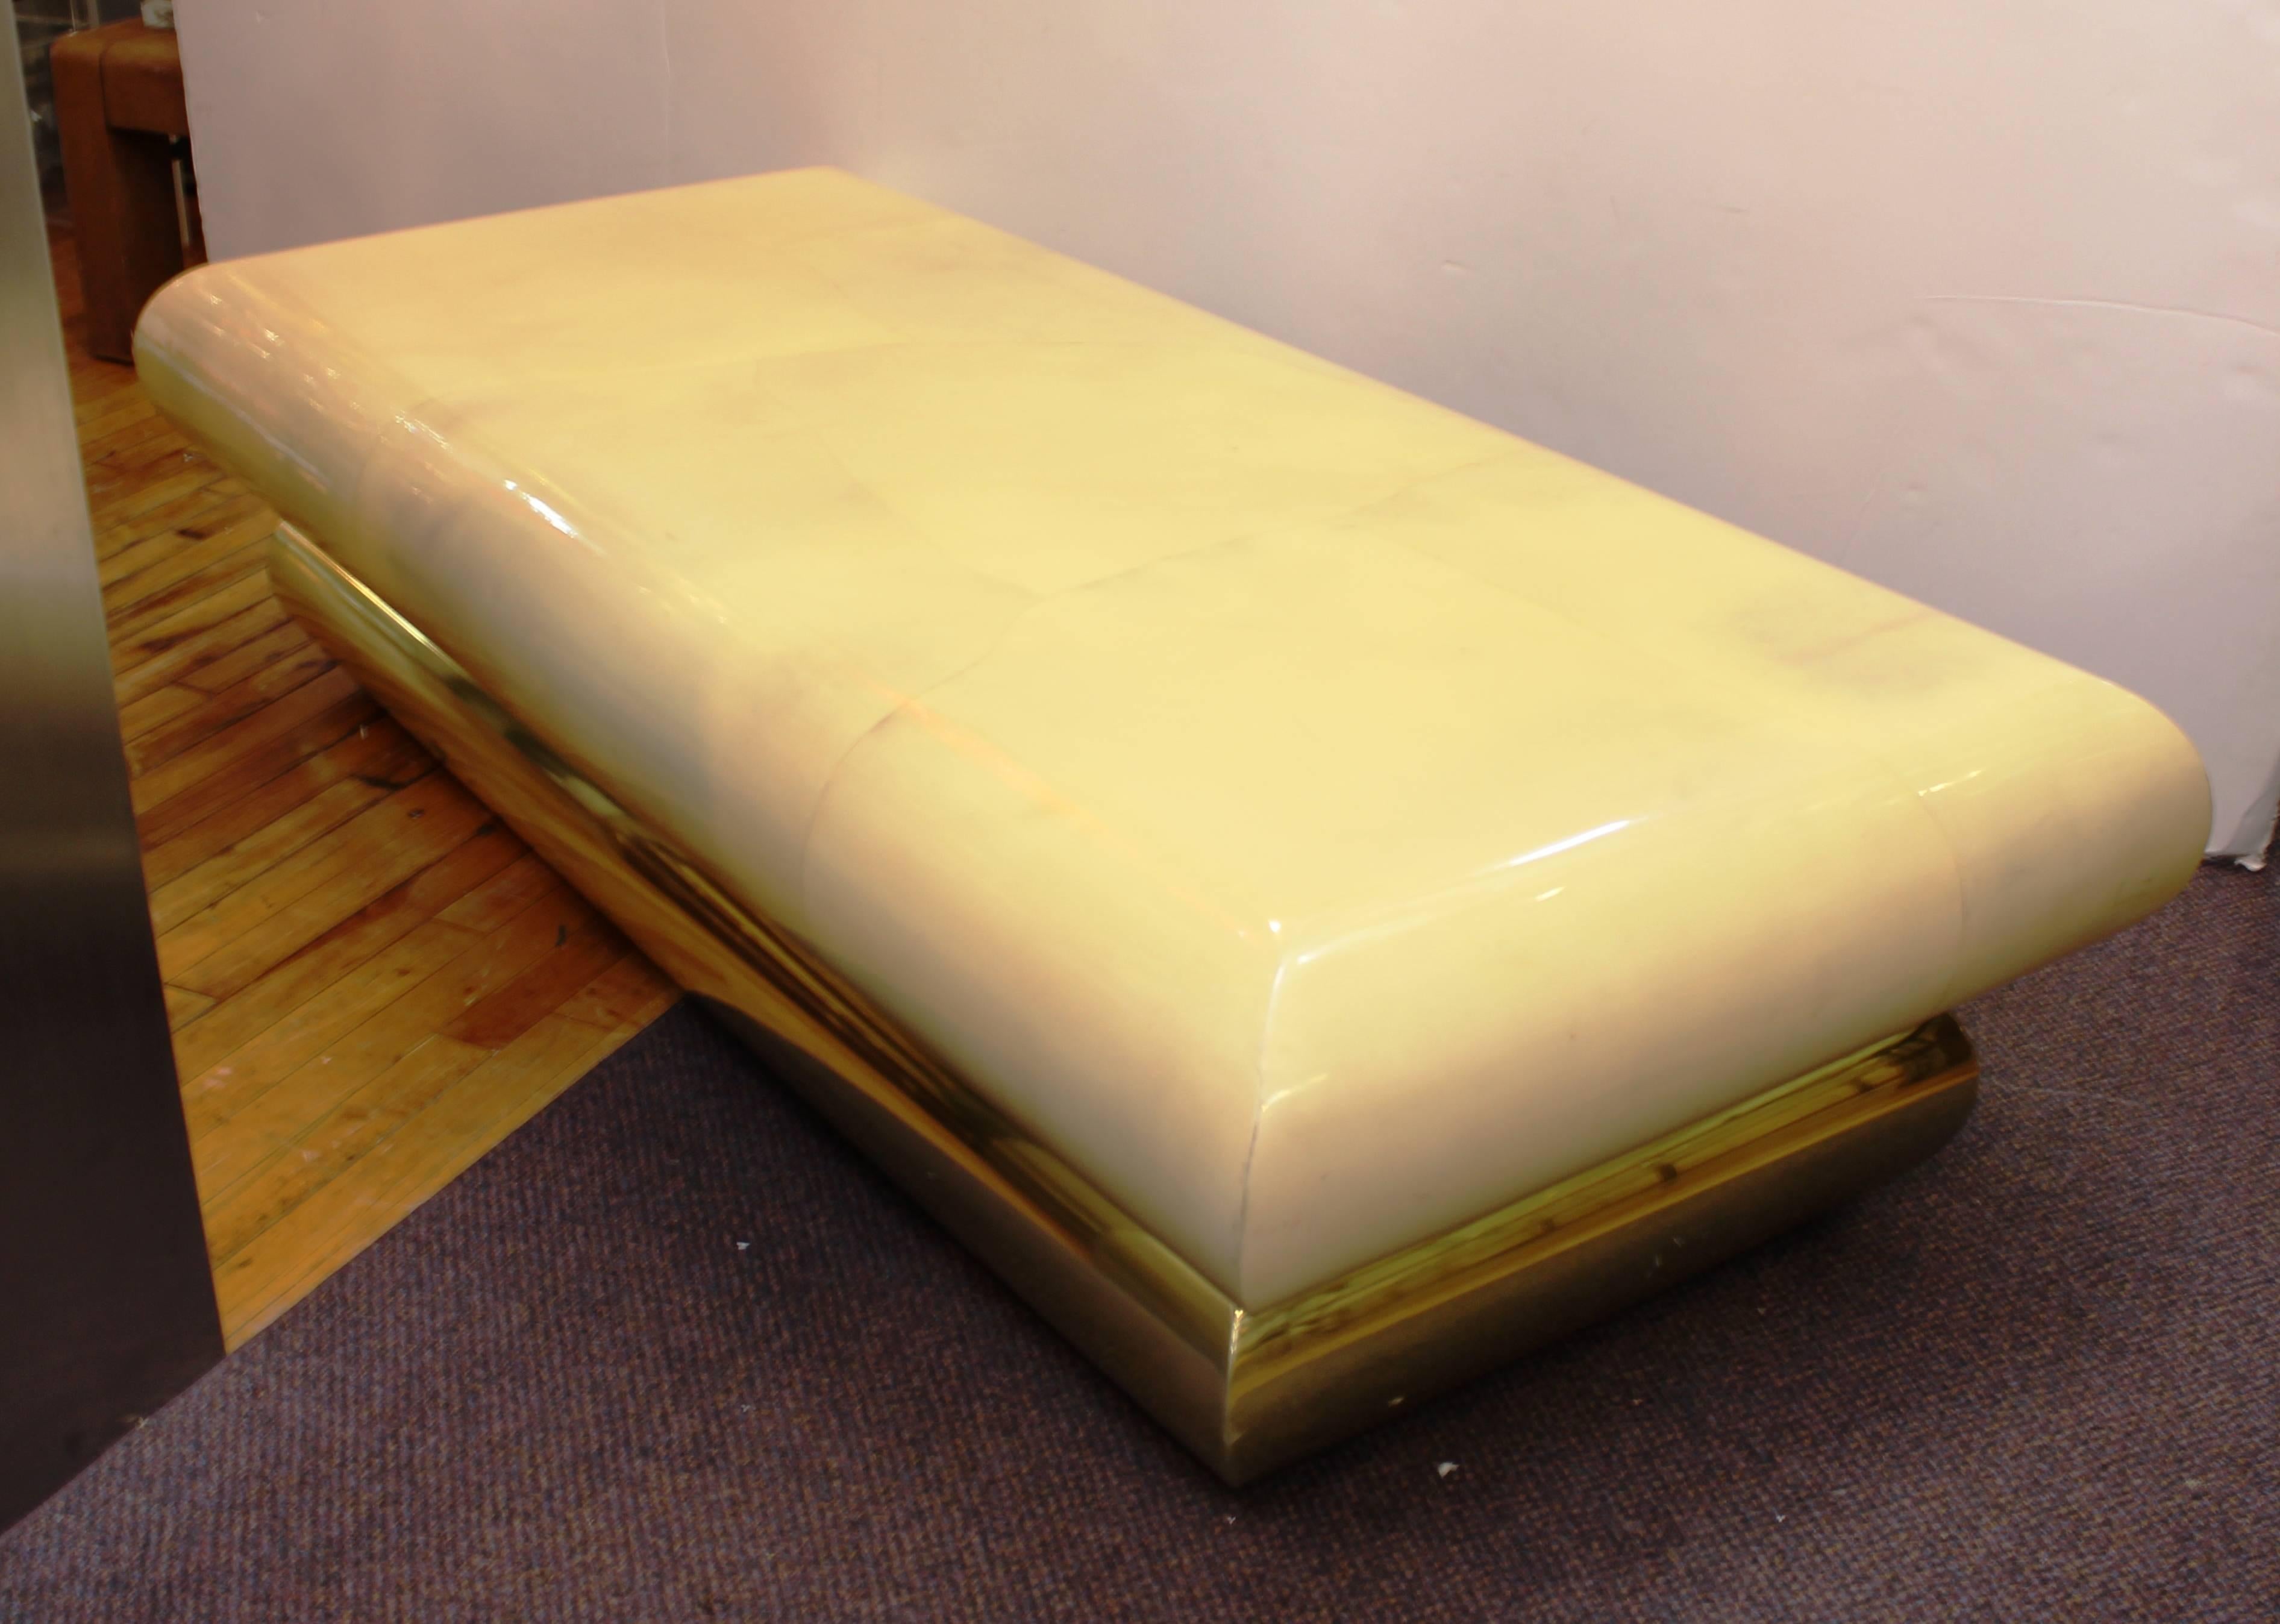 A Mid-Century Modern goatskin and brass cocktail or coffee table. The piece is in good vintage condition with age appropriate wear. Some minor scuffing along the edges.